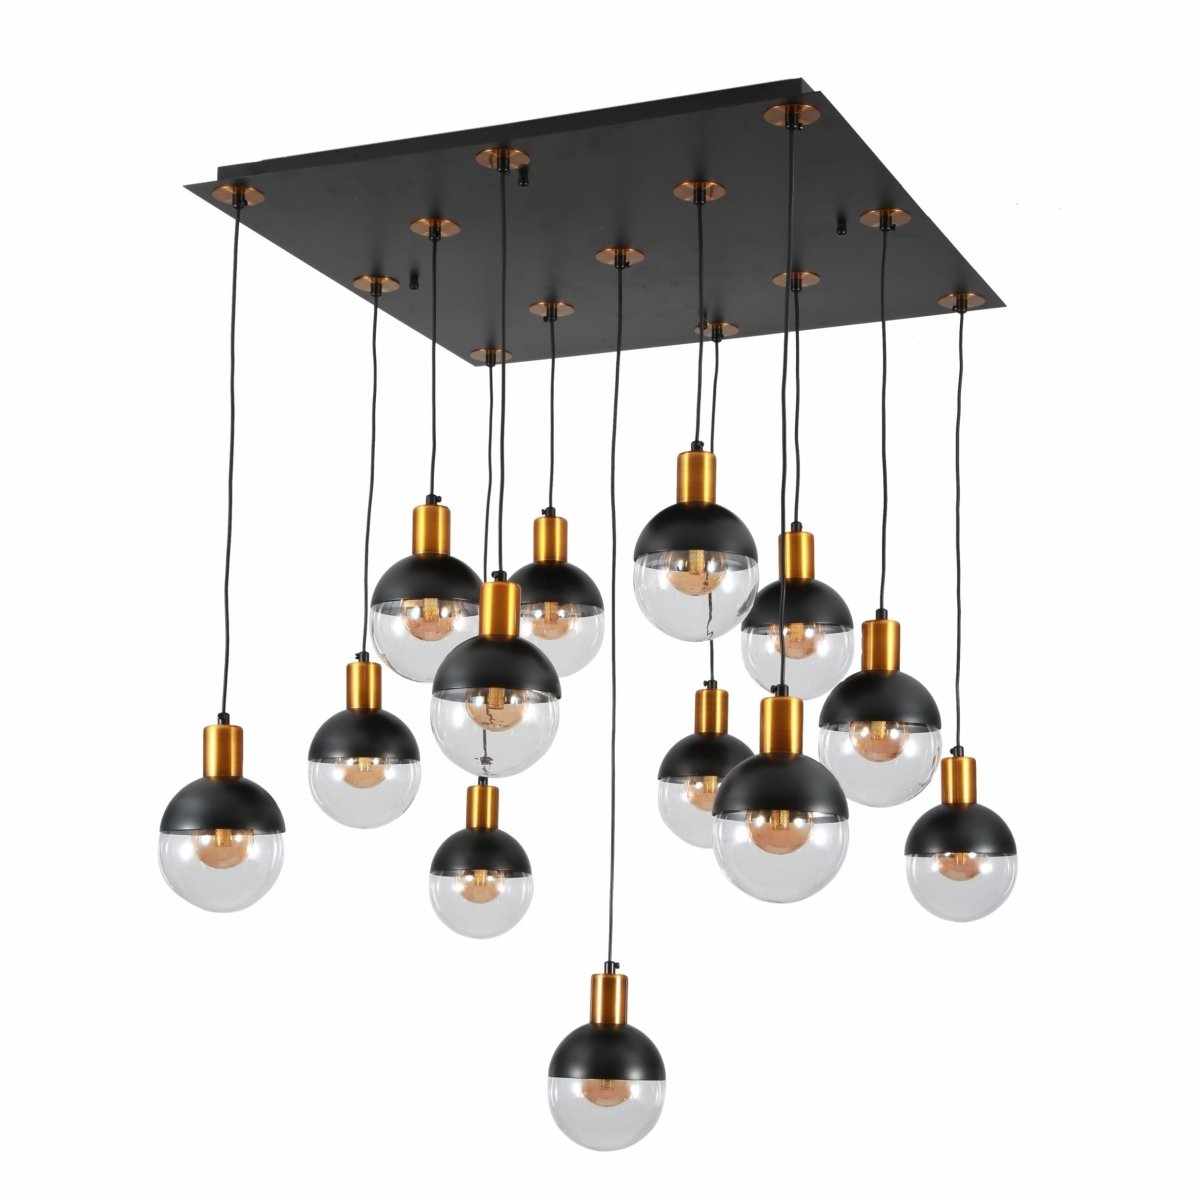 Main image of Clear Black Globe Glass Modern Nordic Chandelier with 13xG9 Fitting | TEKLED 158-19570